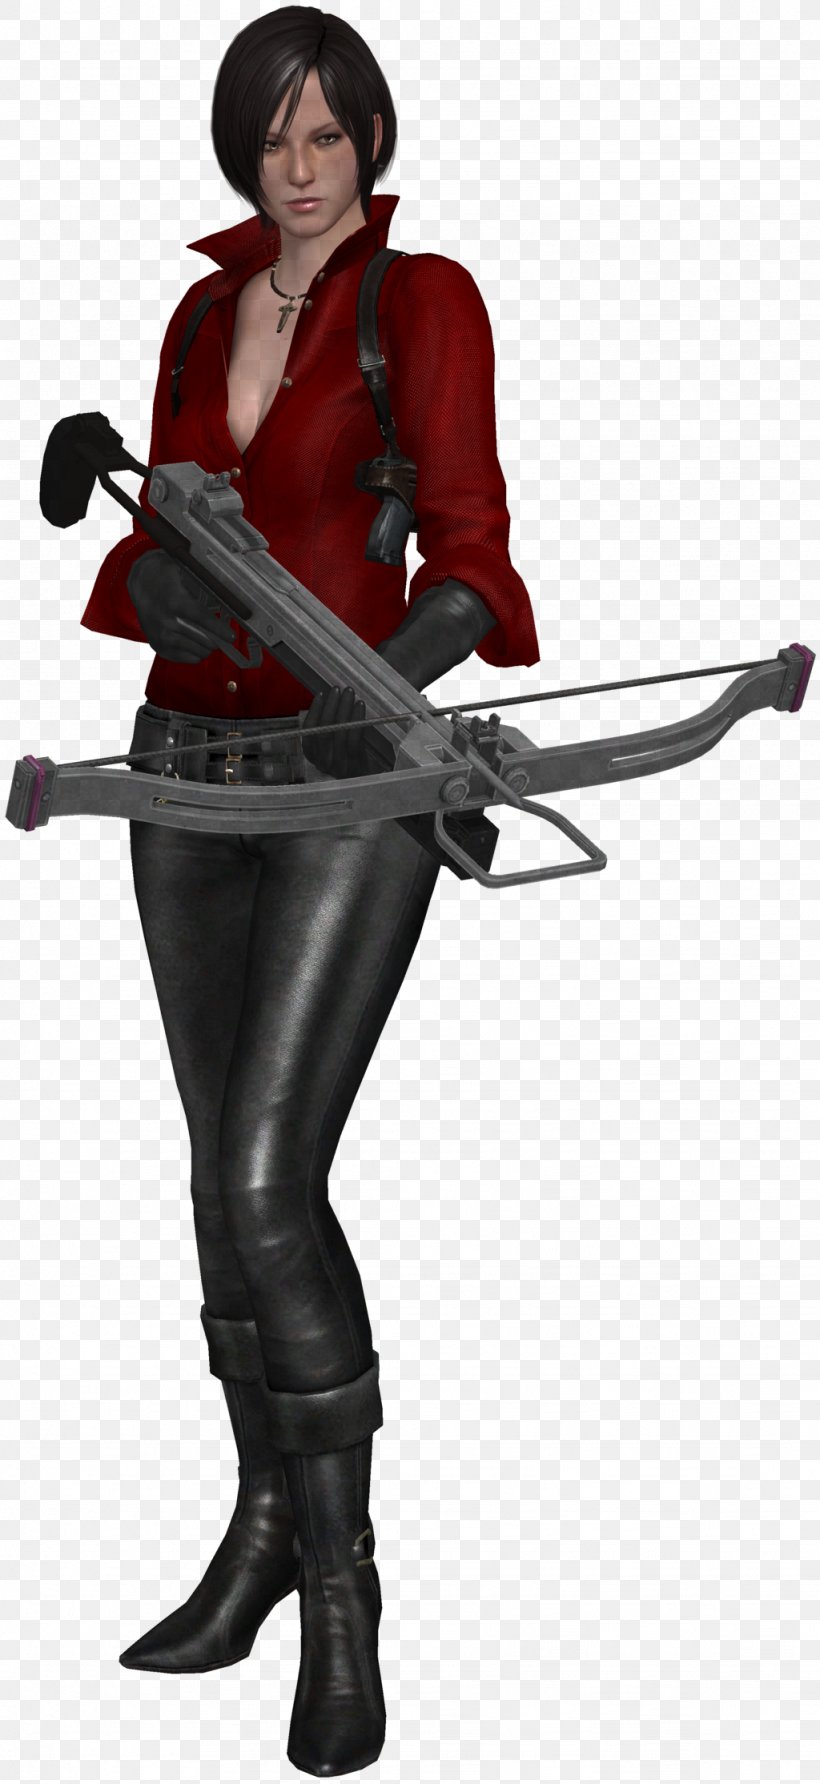 ada-wong-resident-evil-6-resident-evil-4-leon-s-kennedy-video-game-png-1024x2229px-ada-wong